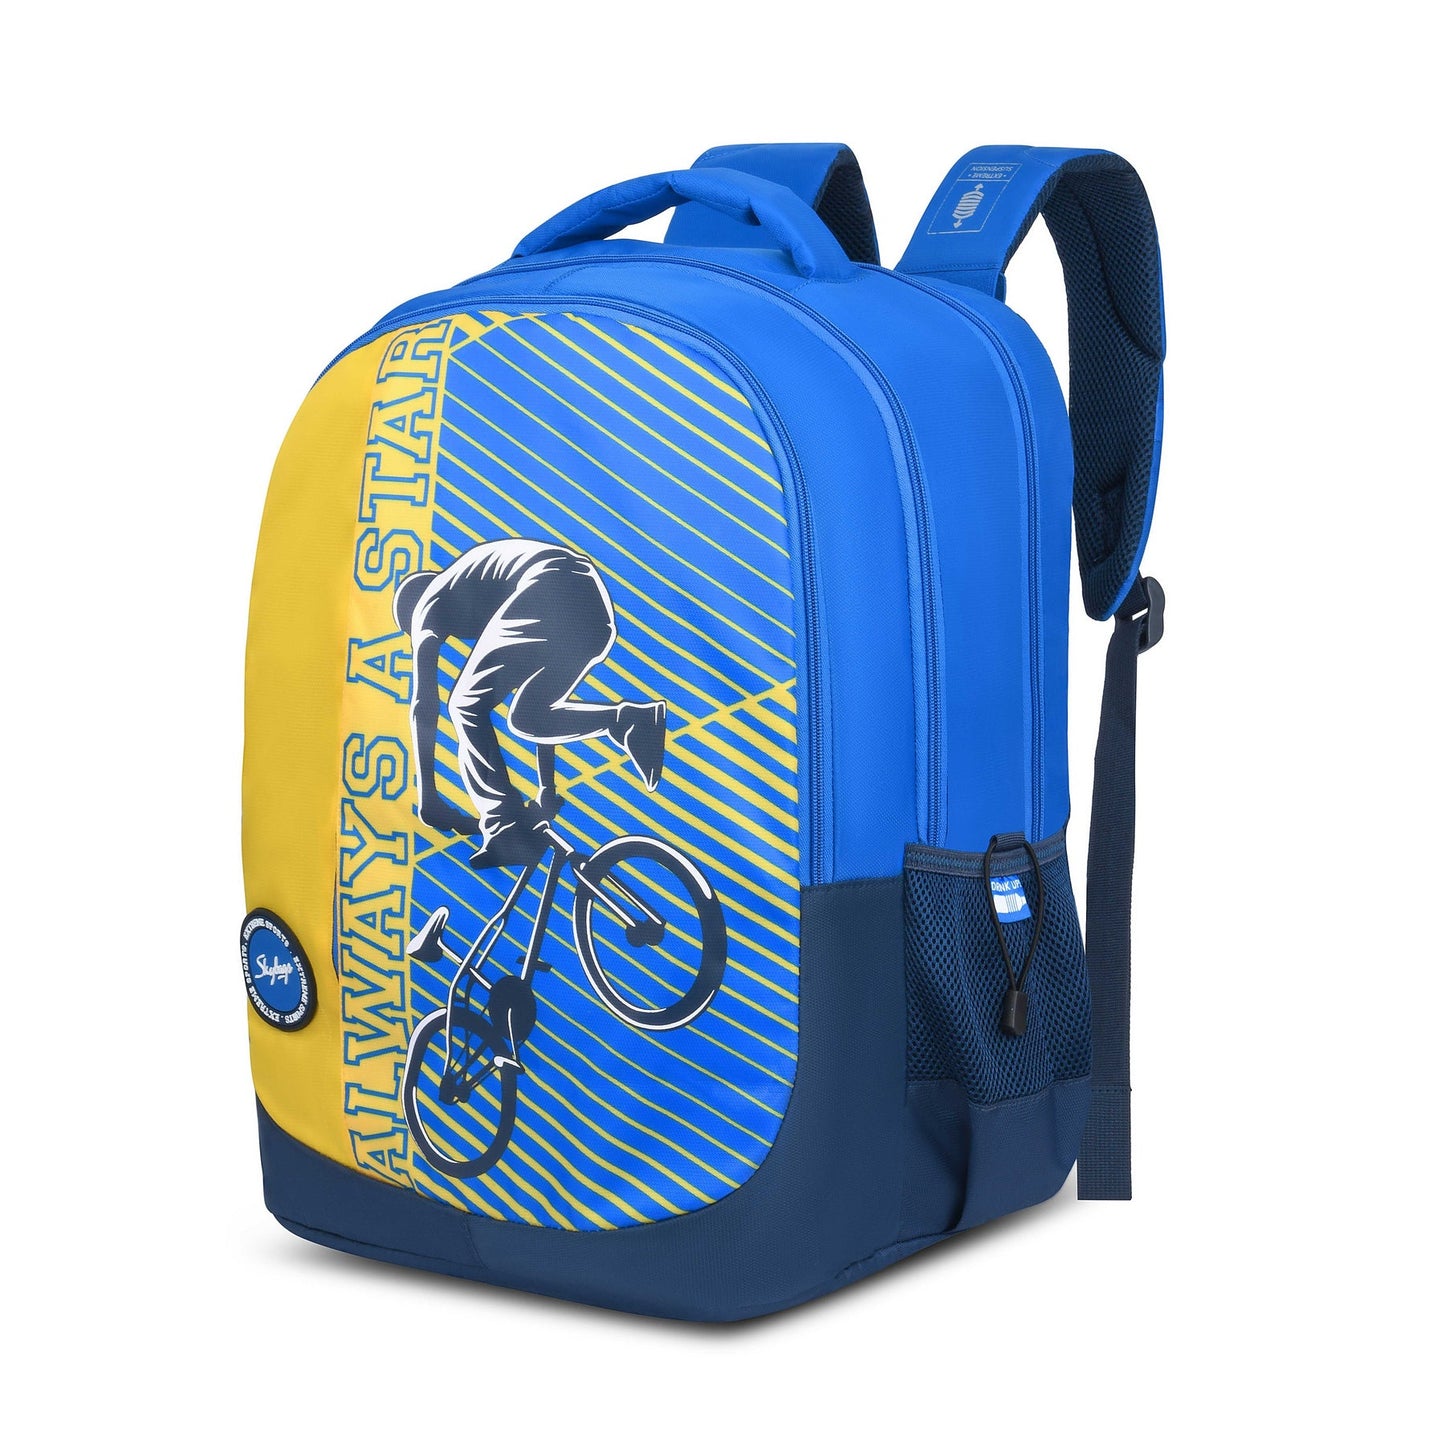 Skybags Squad Pro 01 41L Backpack